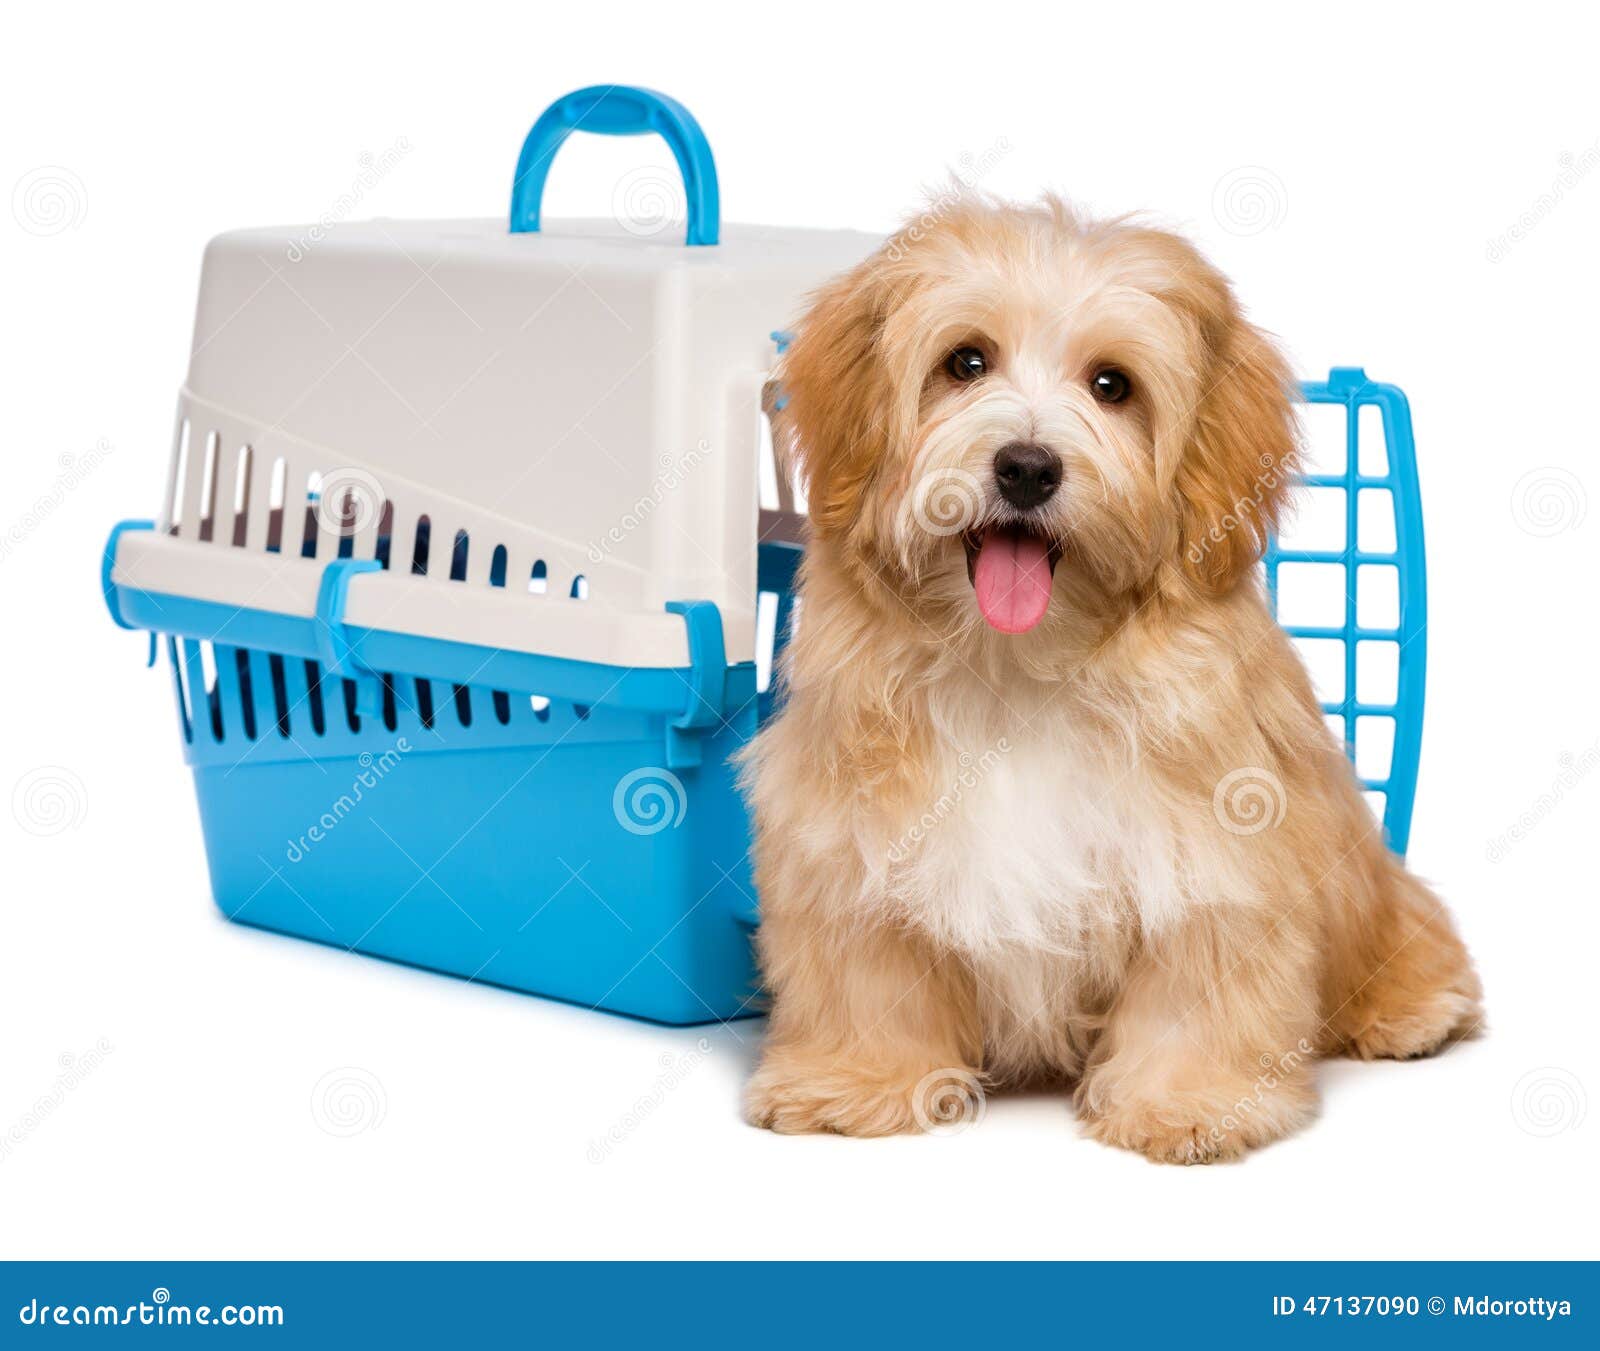 cute happy havanese puppy dog is sitting before a pet crate